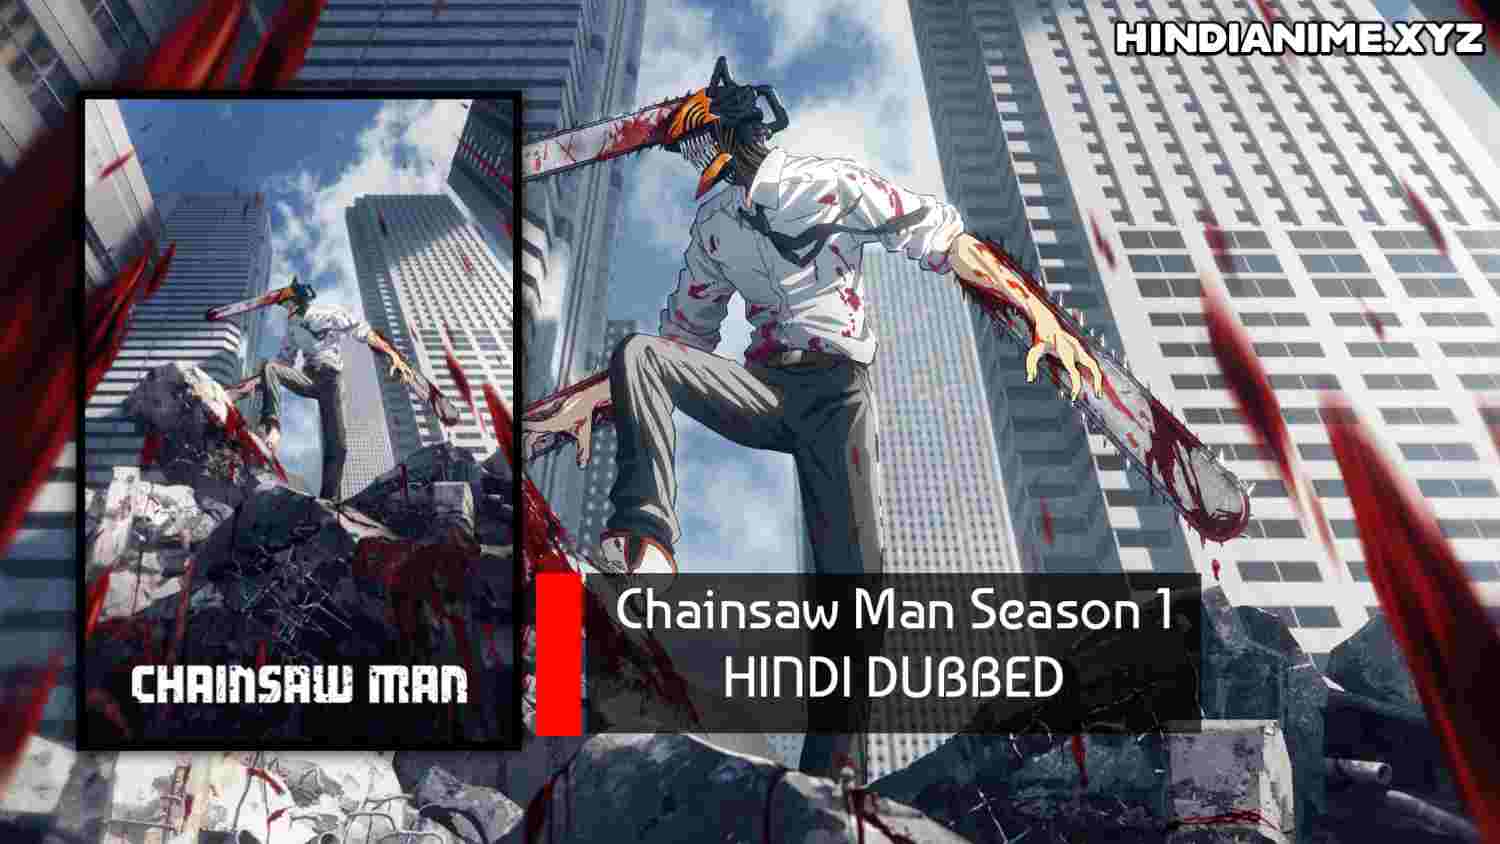 Chainsaw Man Season 1 Hindi Dubbed Download HD - HindiAnime.XYZ, CHAINSAW MAN All Episode in Hindi